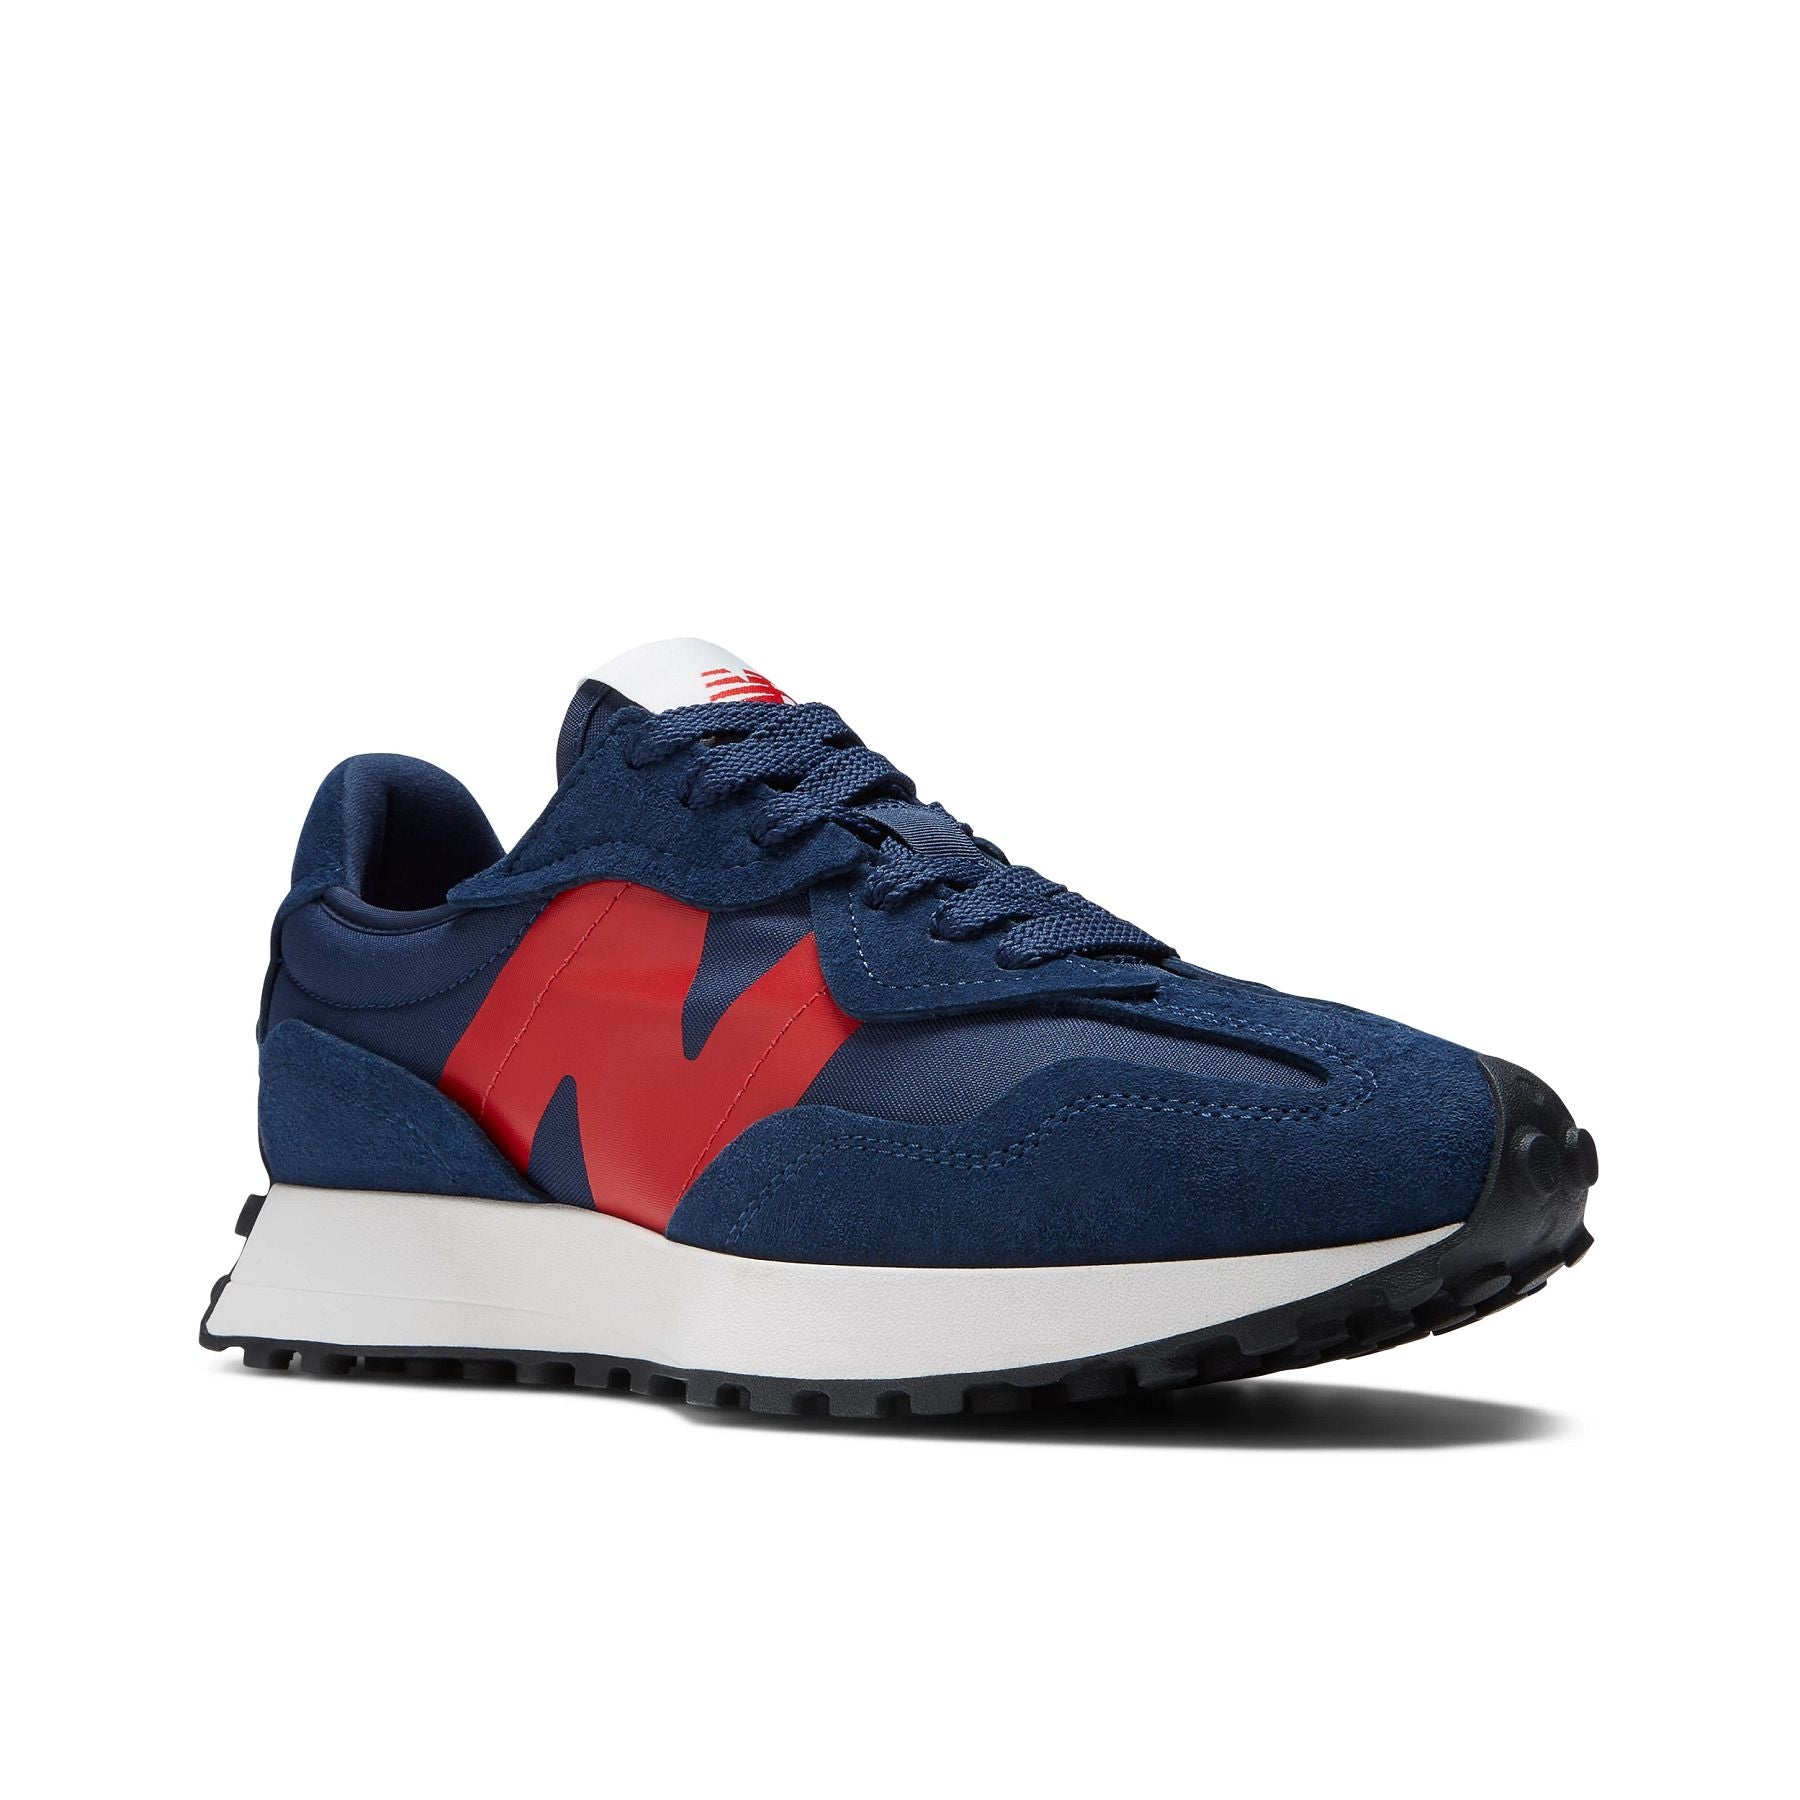 Front angle view of the Men's New Balance lifestyle 327 shoe in the color NB Navy